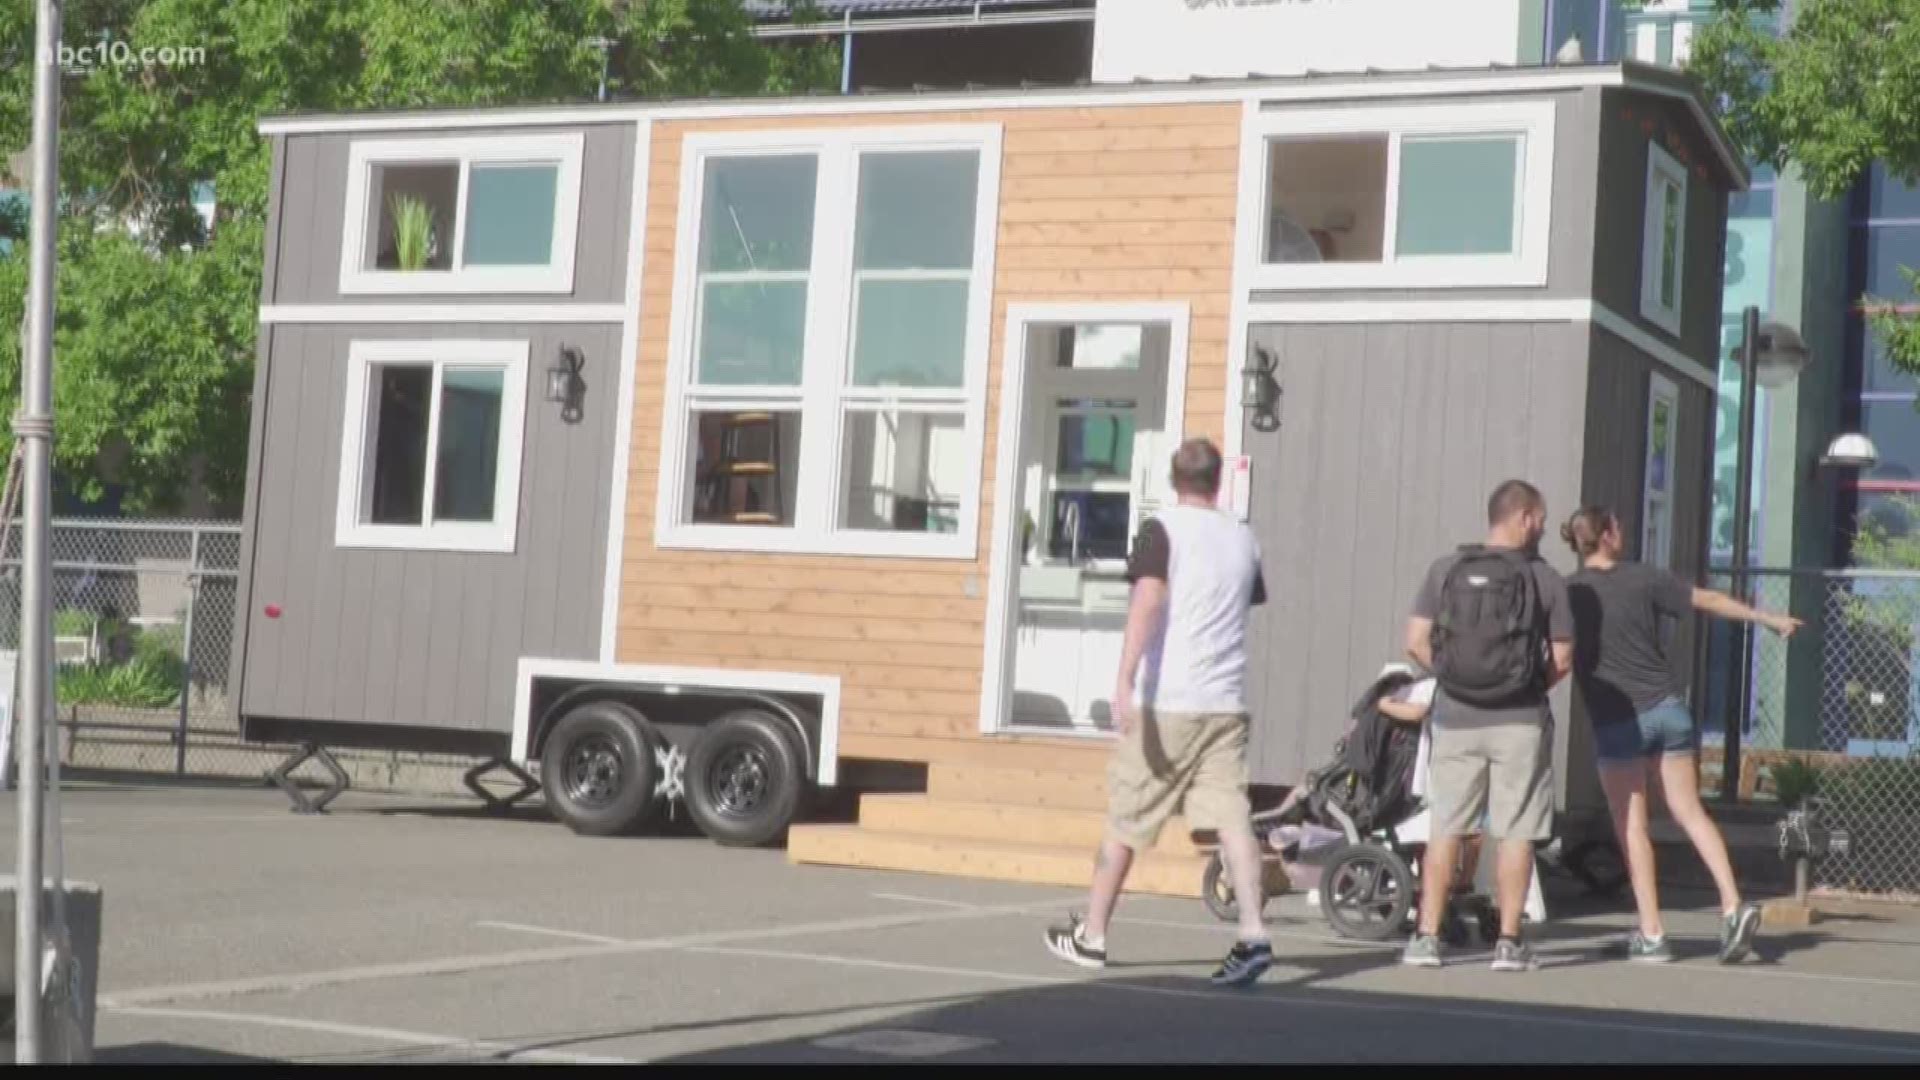 Tiny houses staged at the California State Fair gave visitors the opportunity to see the structures for themselves.